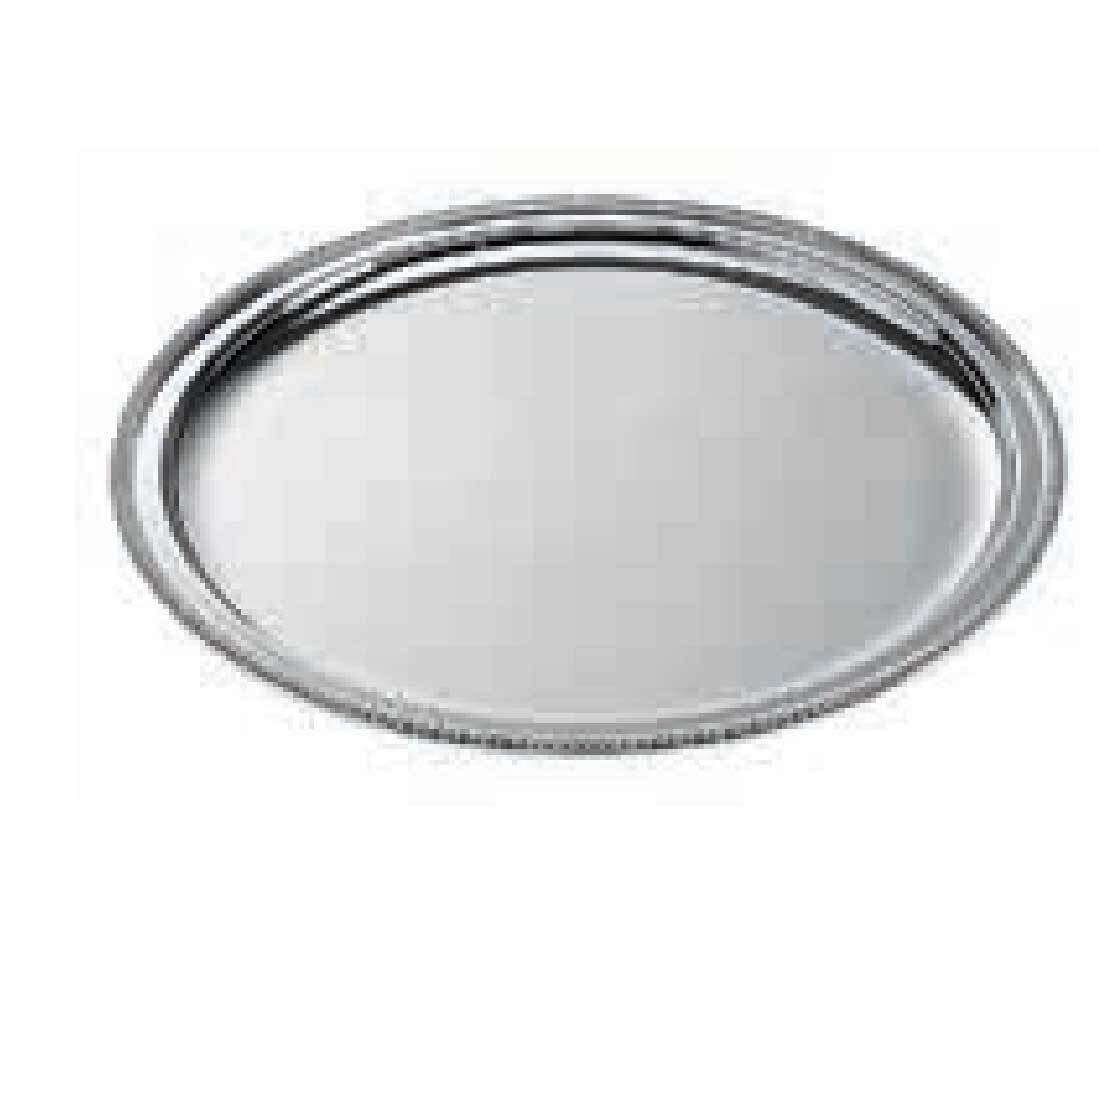 Ercuis Trianon Round Tray 14.125 Inch Silver Plated F51T460-36